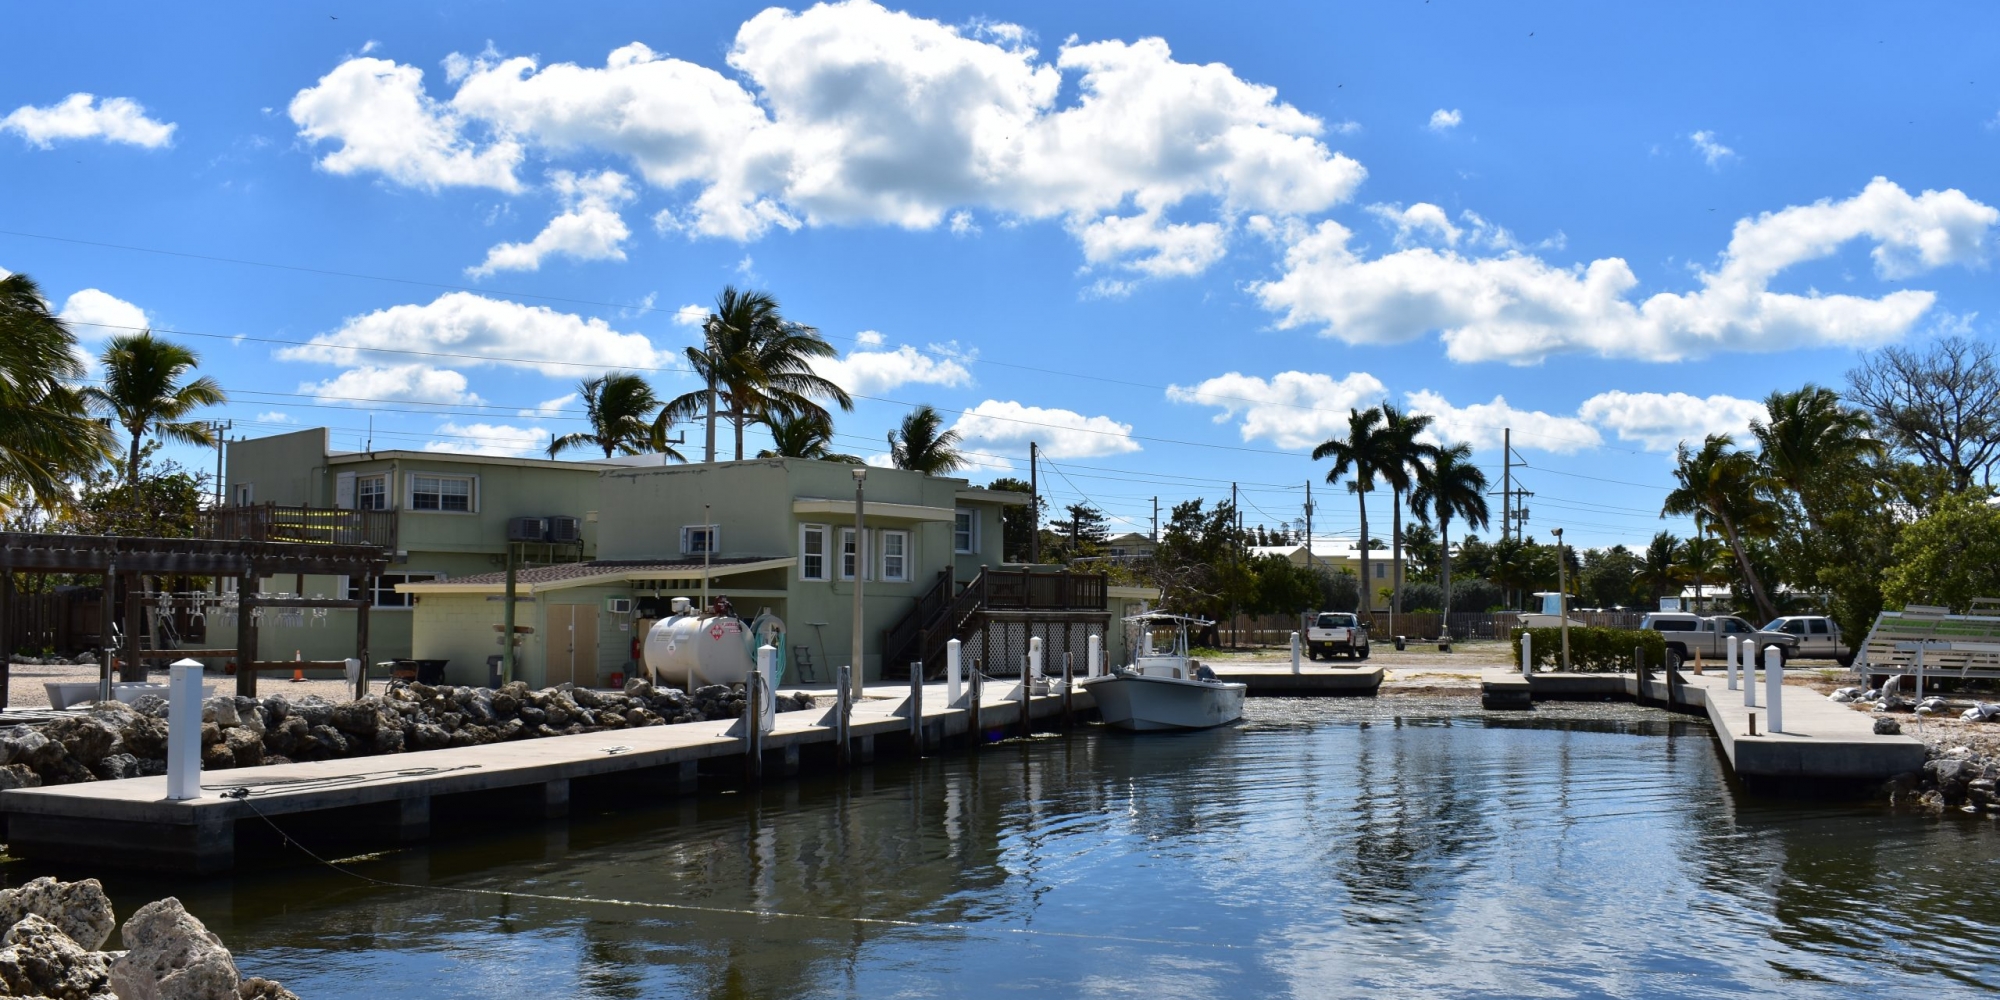 KML Marina provides direct access to the Florida Bay and plenty of dock space.